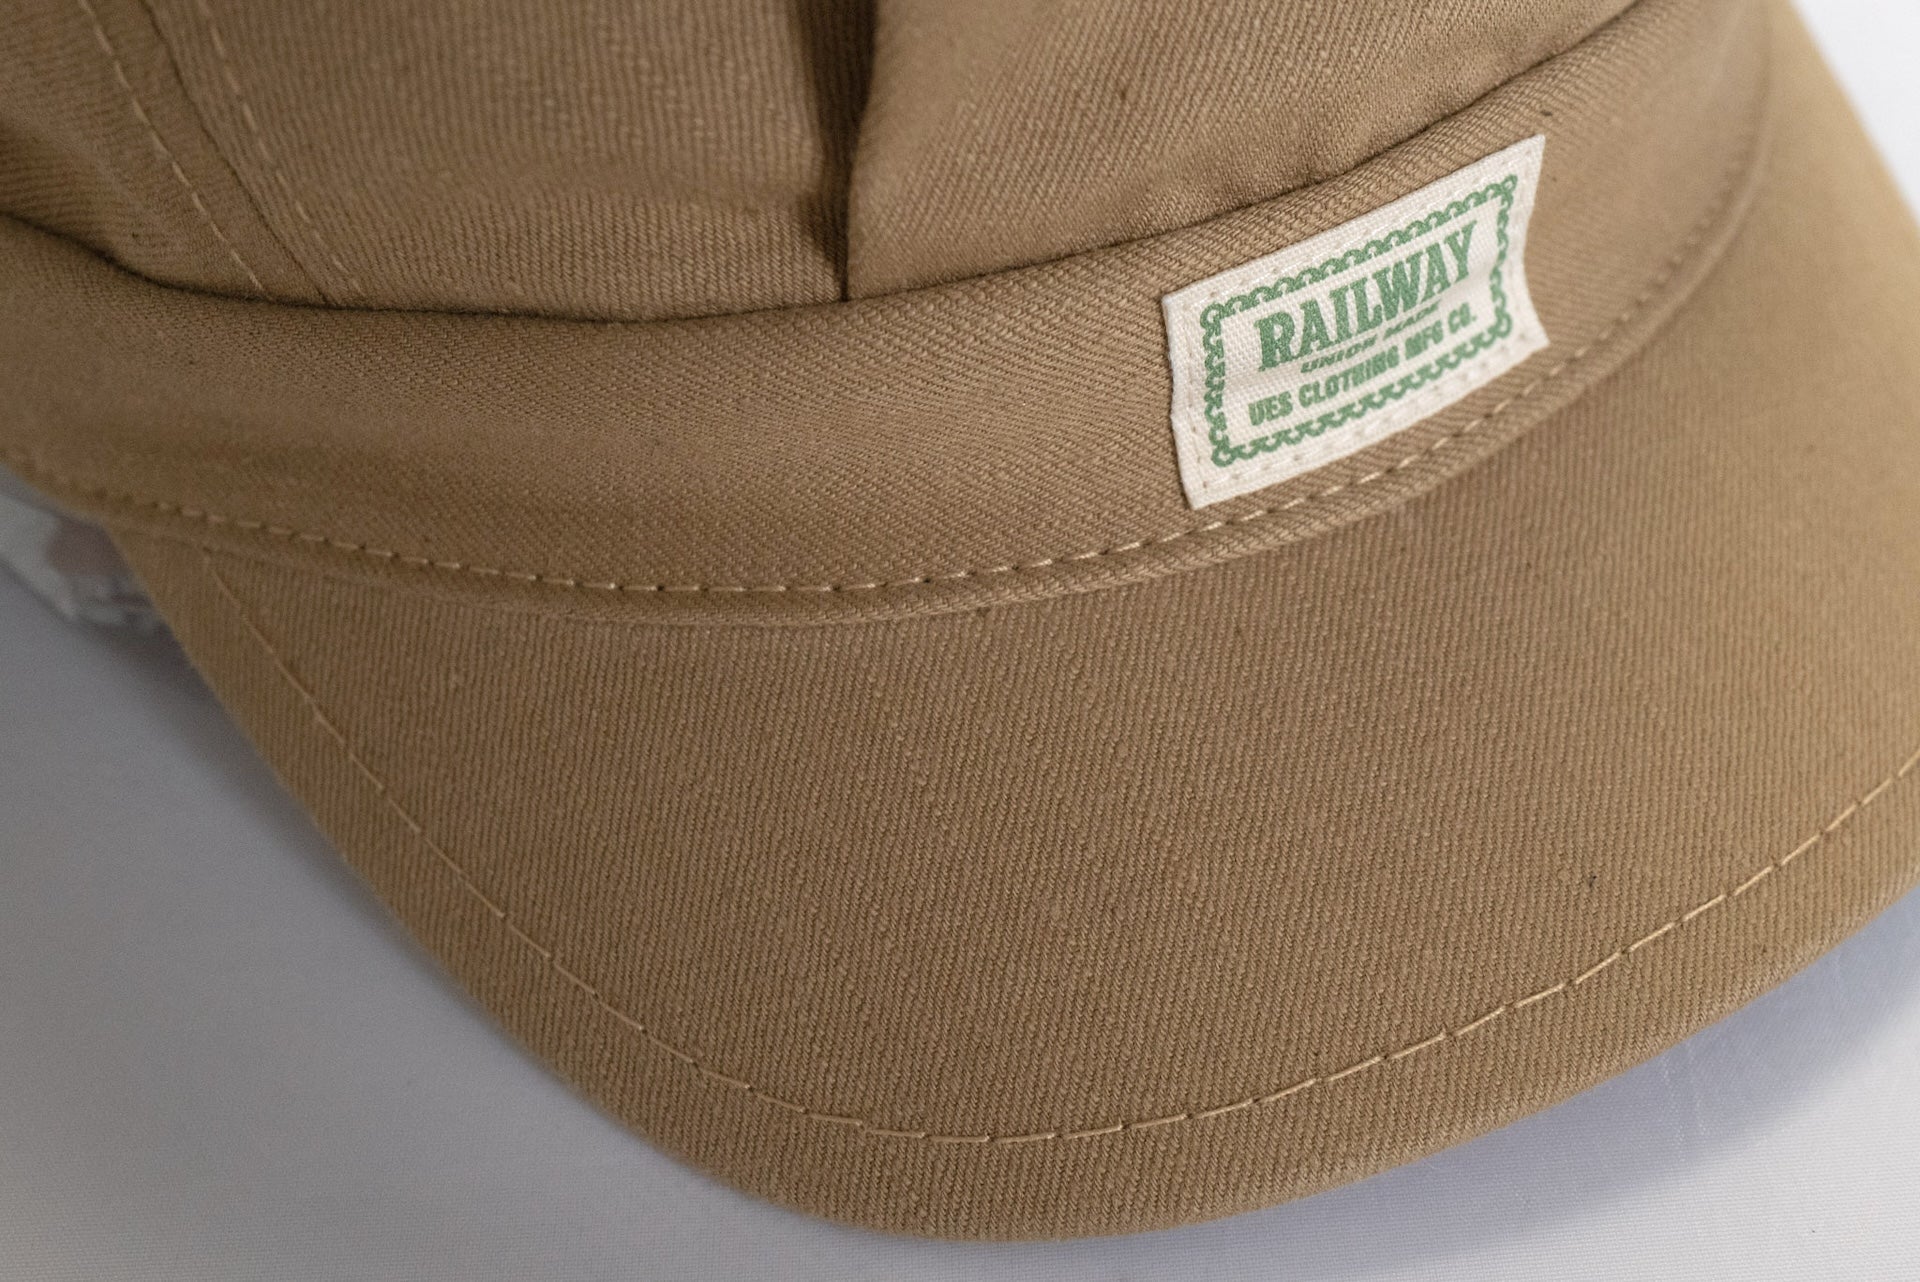 UES 12oz "Delivery Boy" Selvage Cotton Twill Work Cap (Beige)